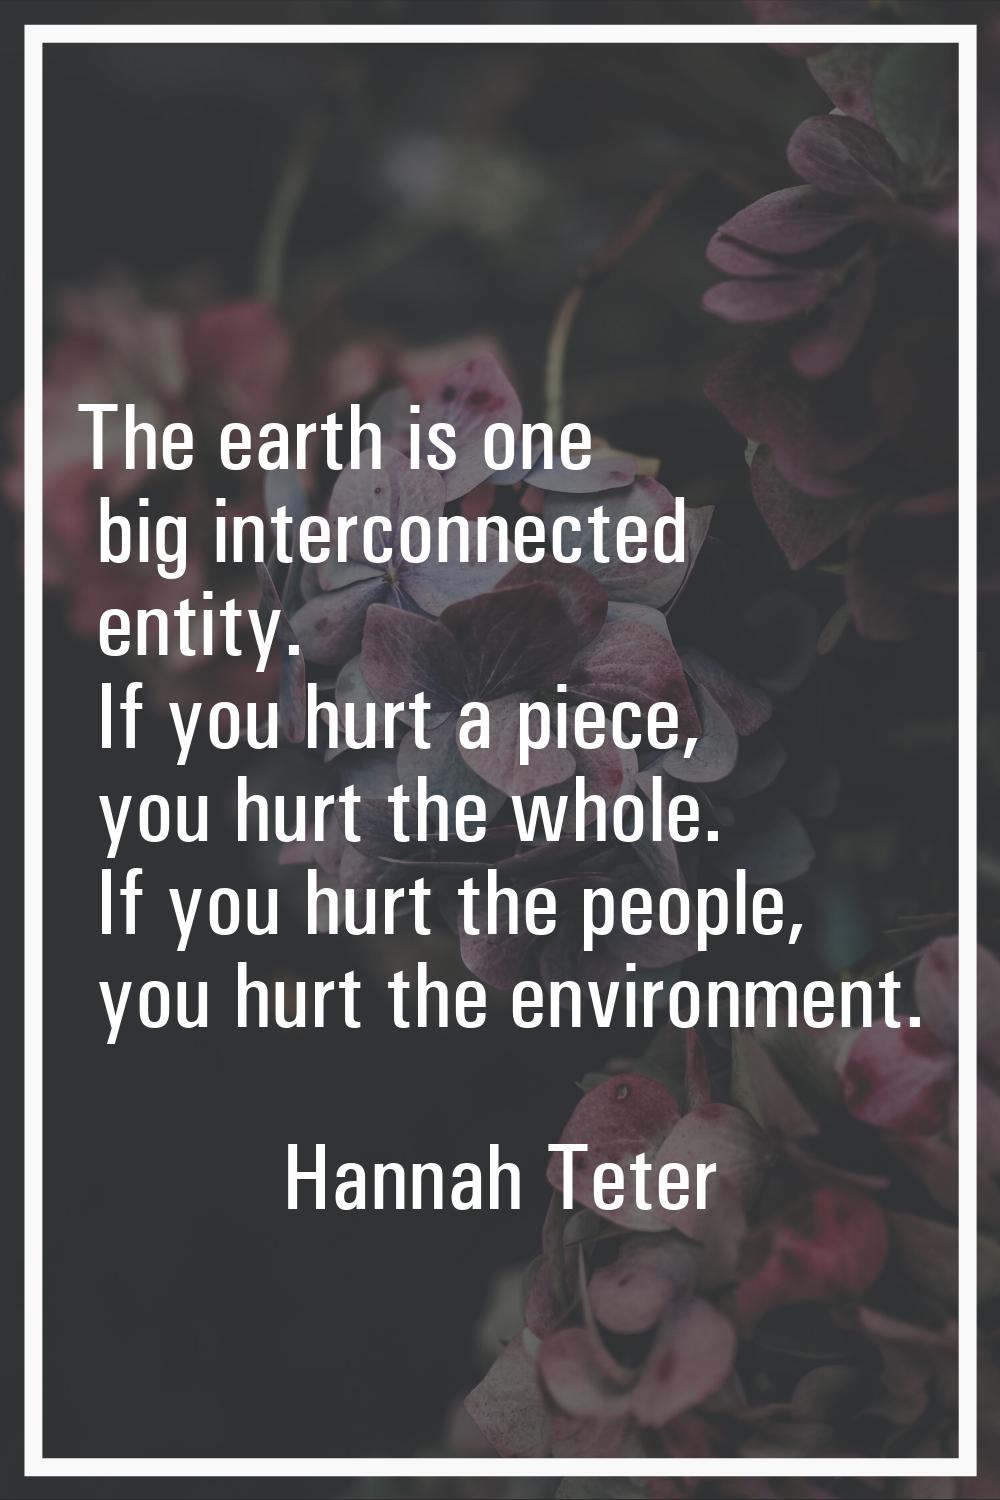 The earth is one big interconnected entity. If you hurt a piece, you hurt the whole. If you hurt th